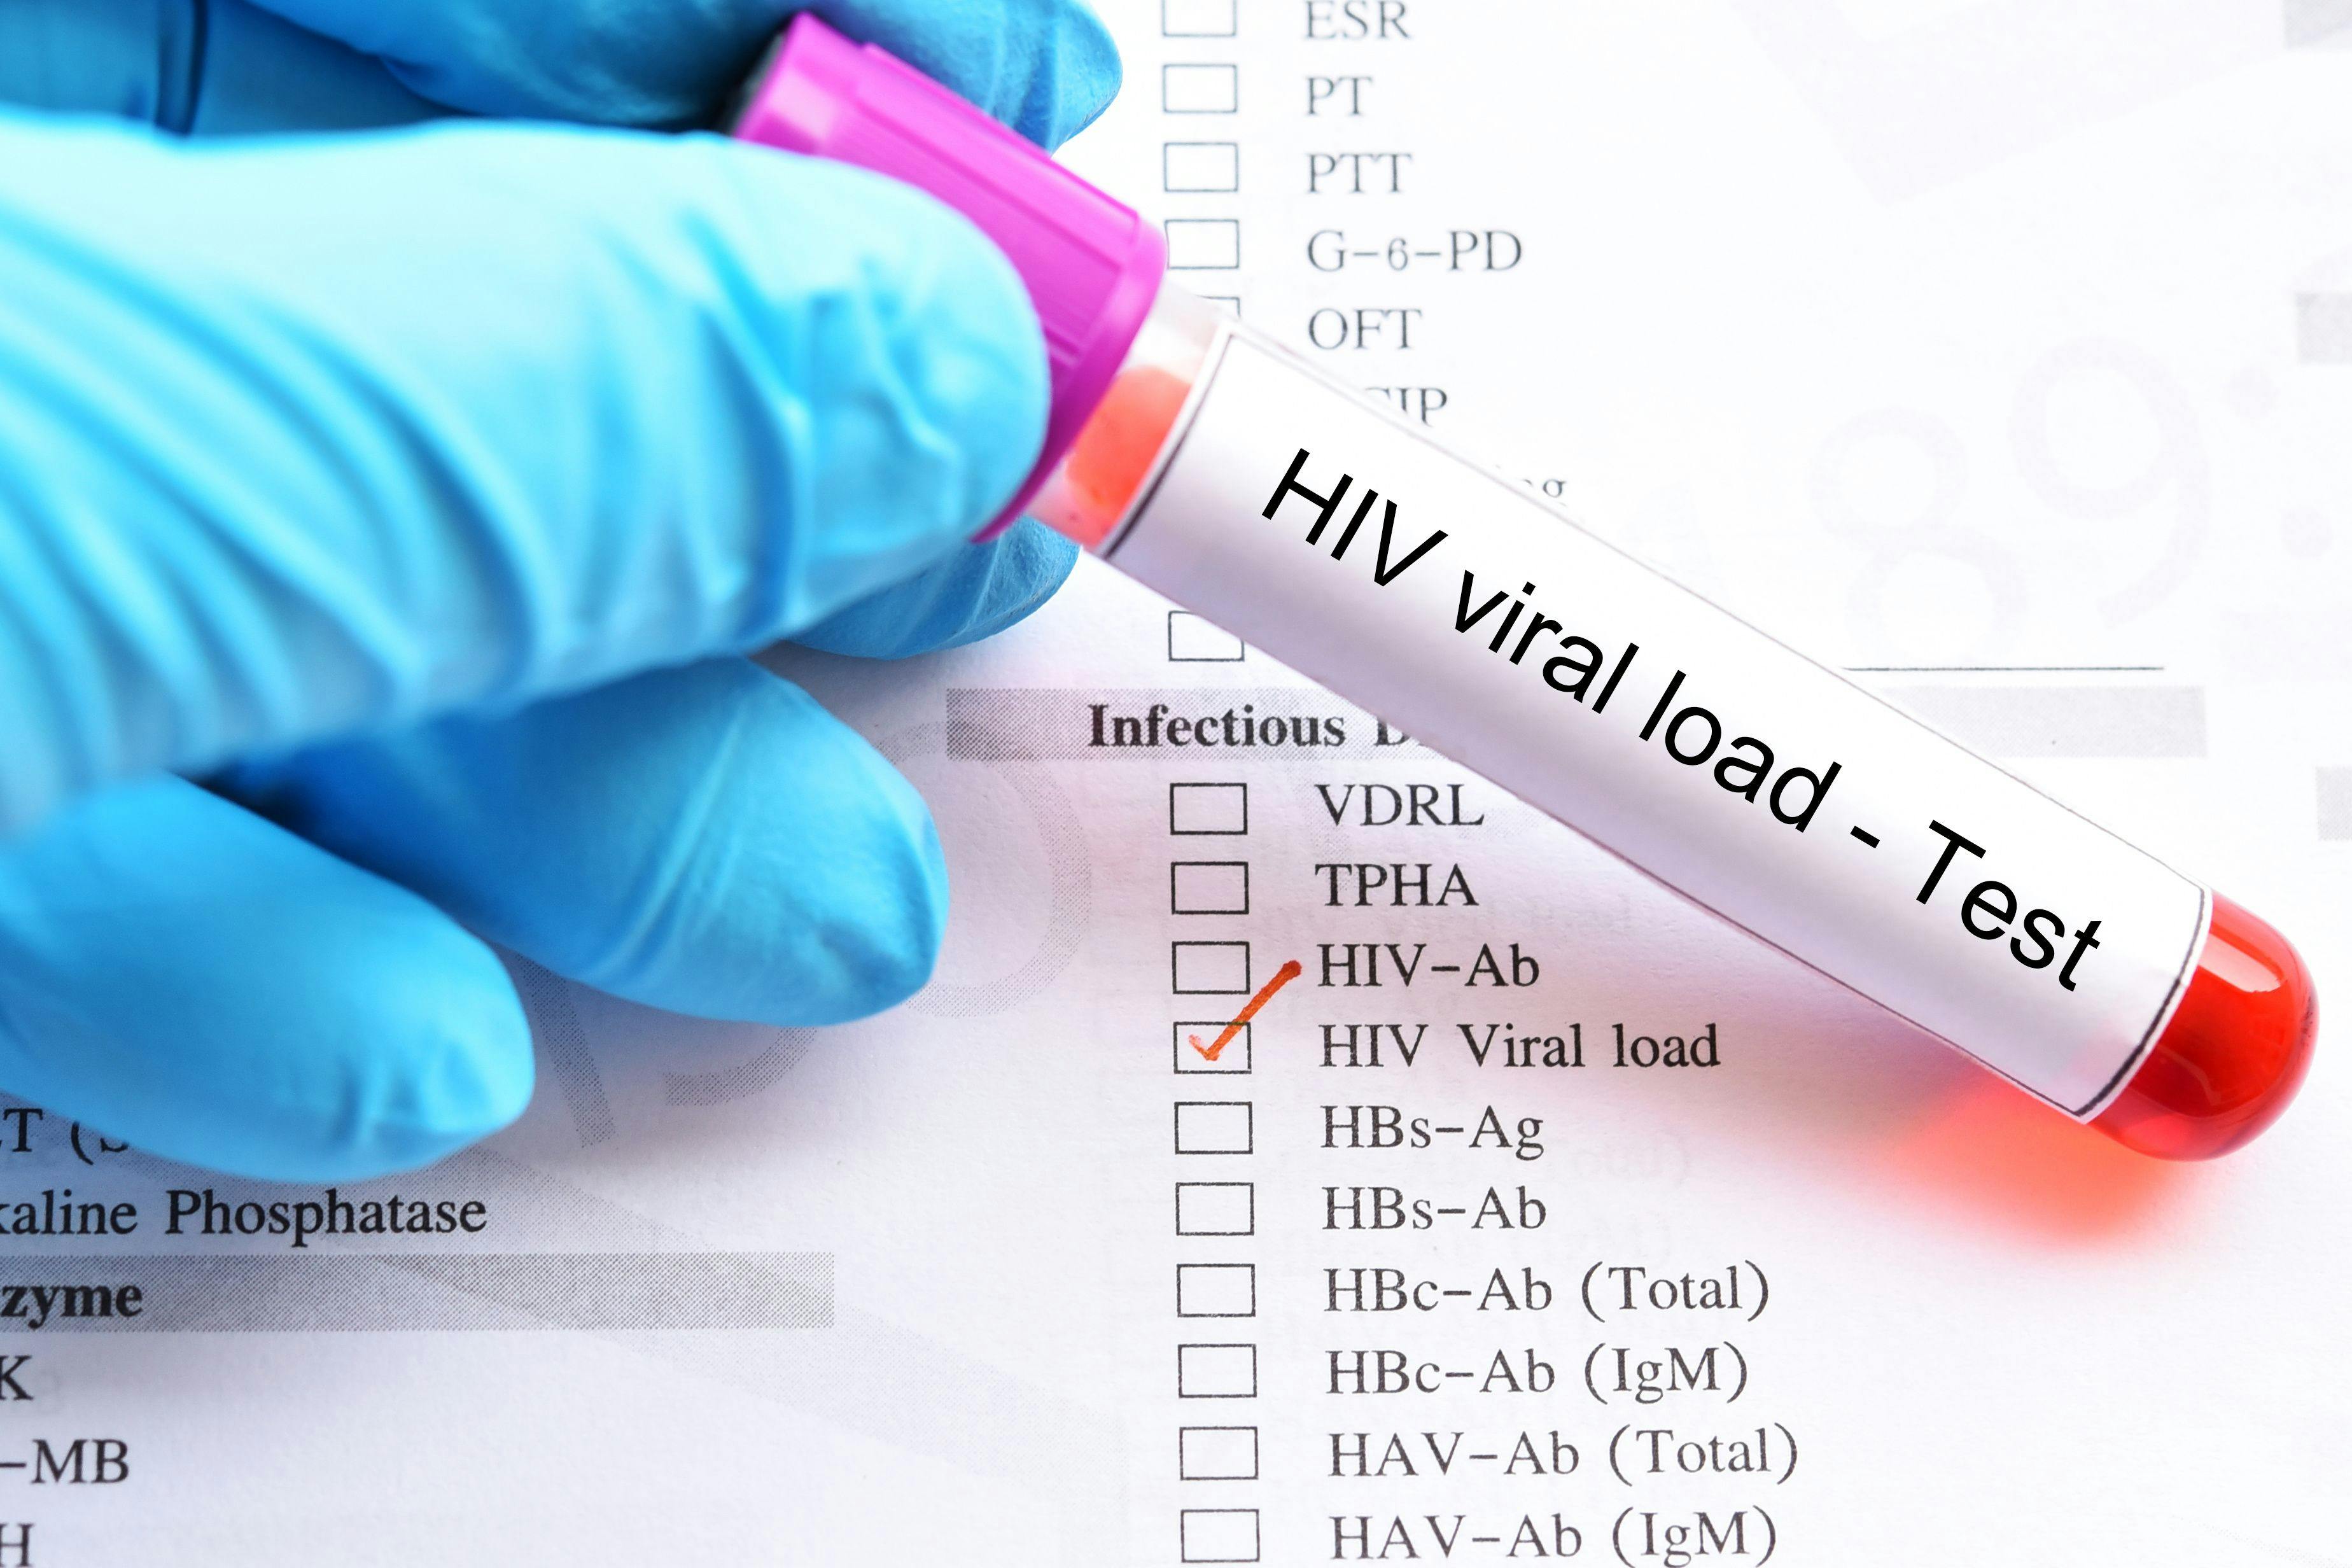 The Risk Of Sexual Transmission Of HIV From Individuals With Low-Level HIV Viremia